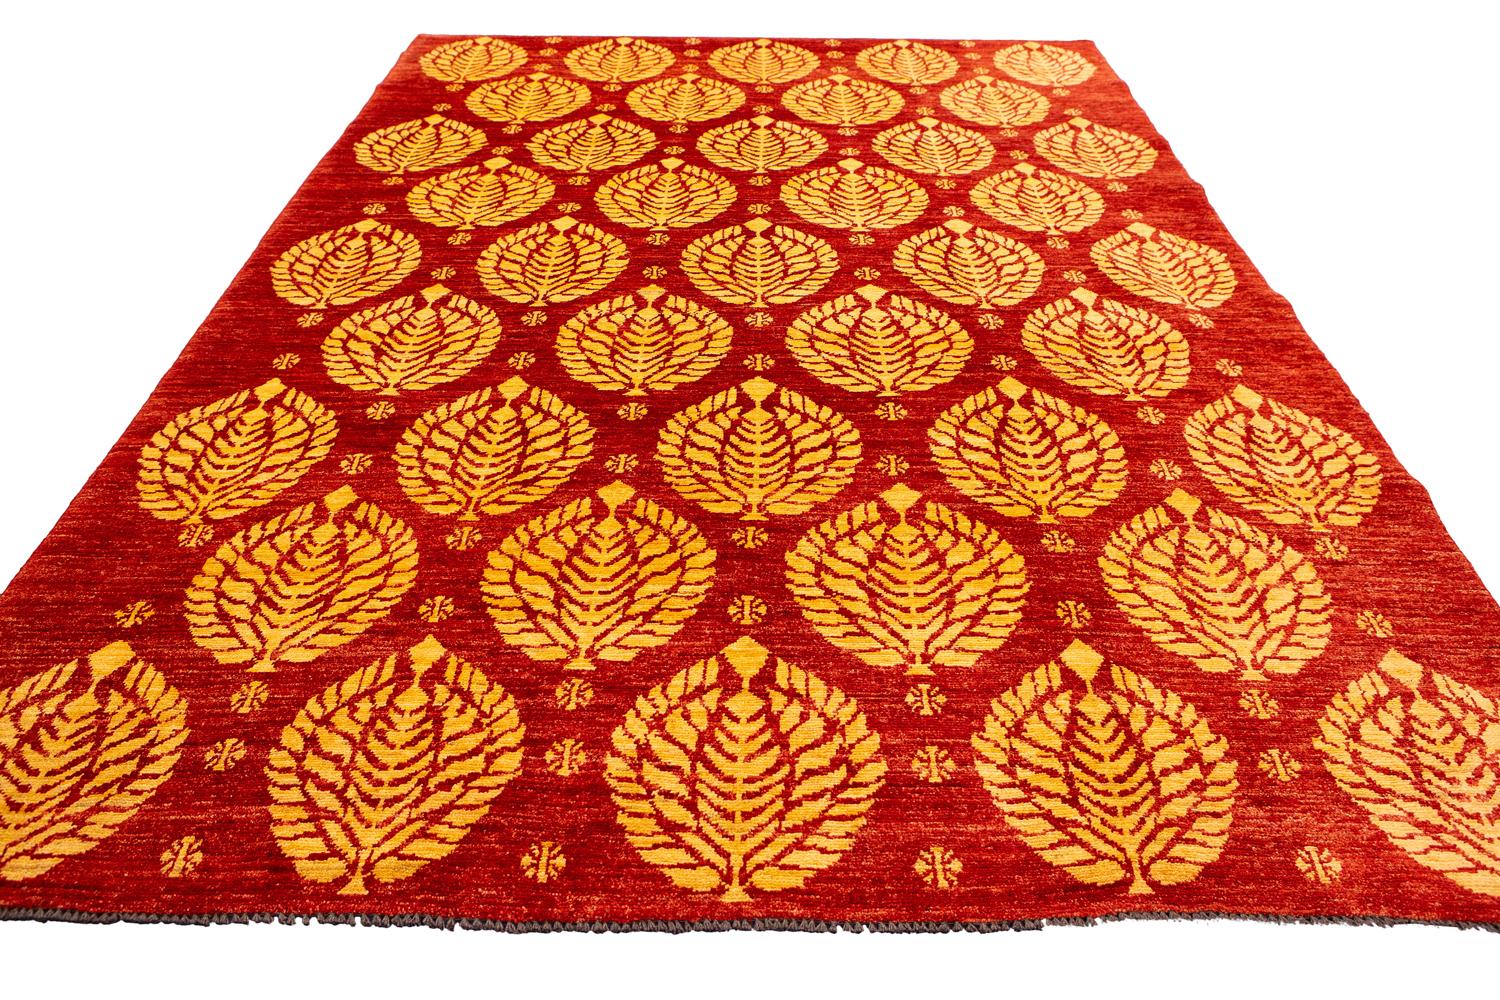 Other Bold Design Hand-Knotted Vintage Red Field Etno Yadan Rug, XXI Century For Sale